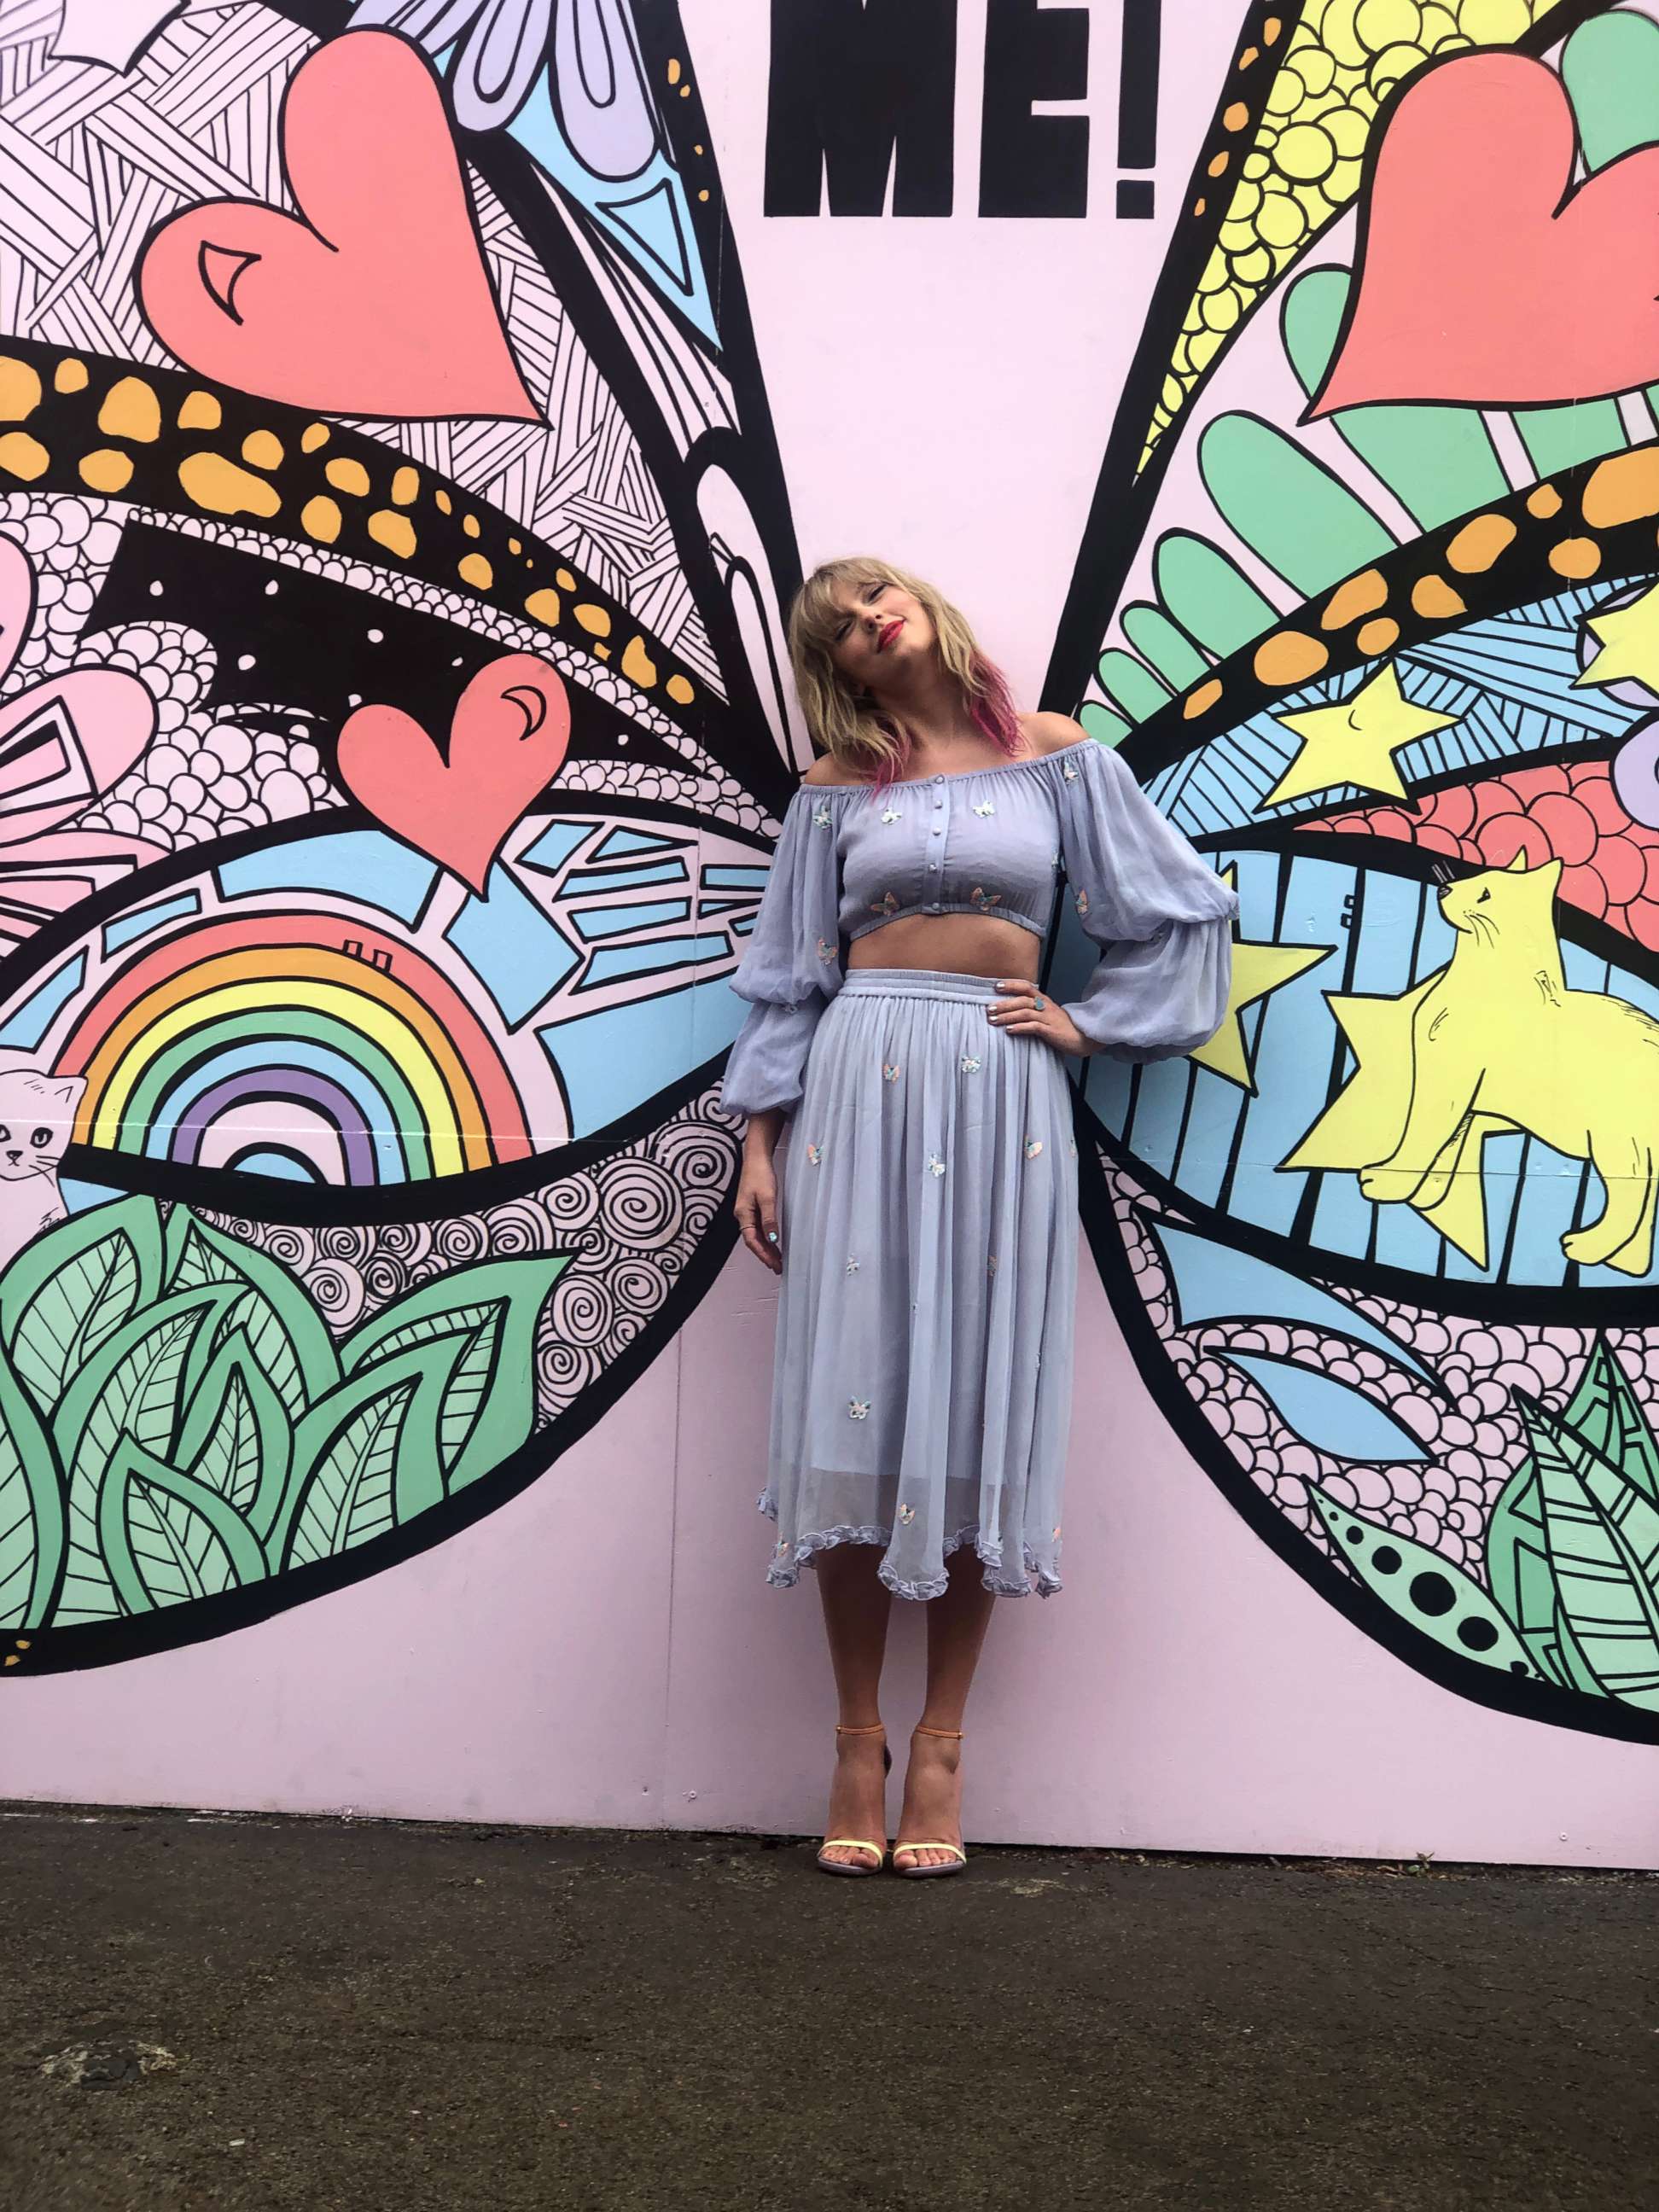 PHOTO: Taylor Swift poses in front of a butterfly mural in Nashville, Tenn., April 25, 2019. The mural offers clues to her forthcoming music.